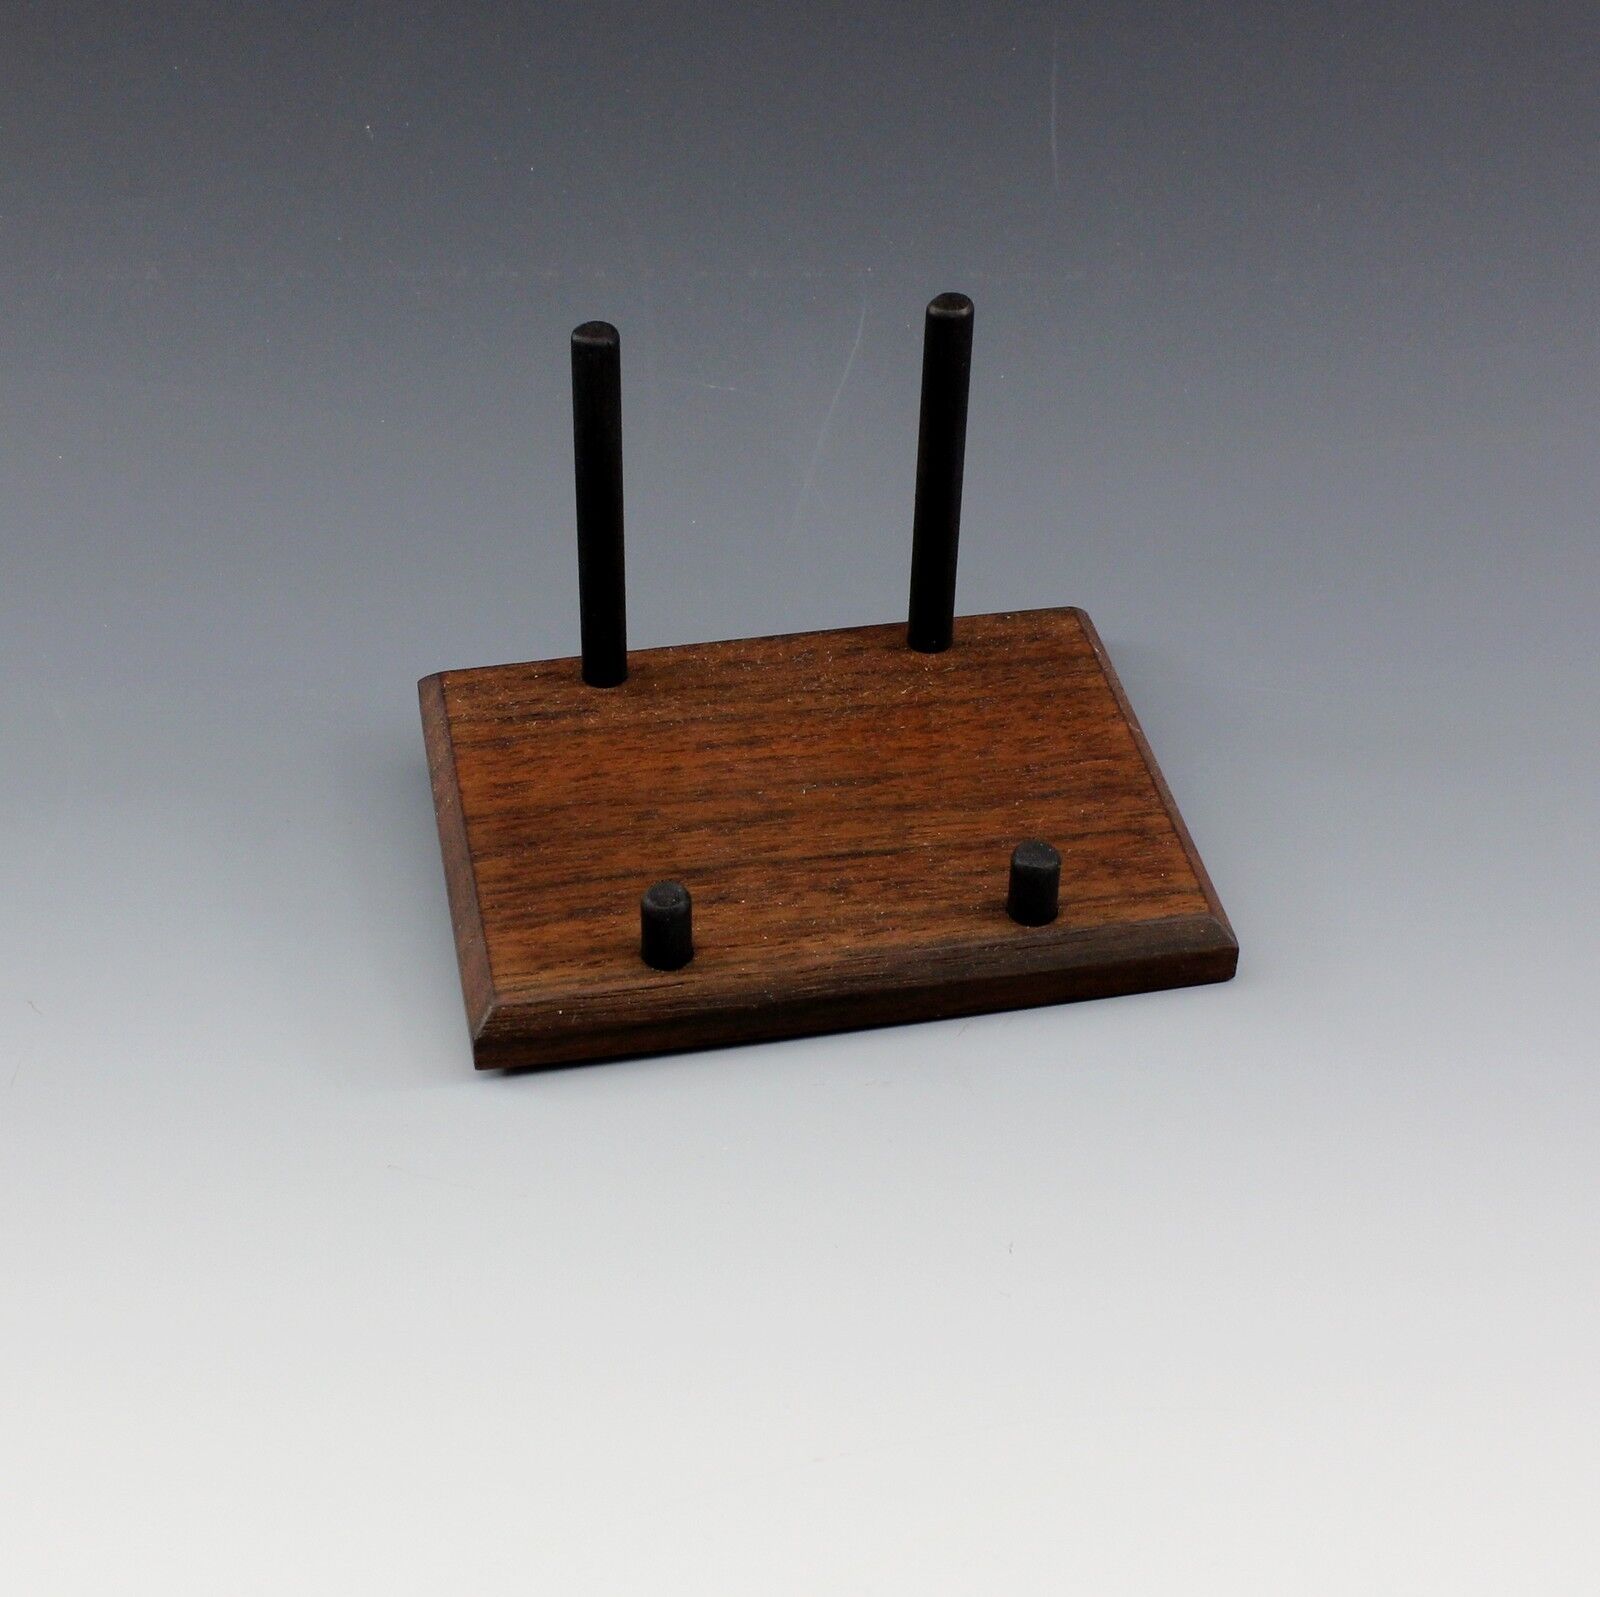 MINERAL DISPLAY STAND, 4 INCH AMERICAN BLACK WALNUT,  MUSEUM QUALITY DISPLAY 